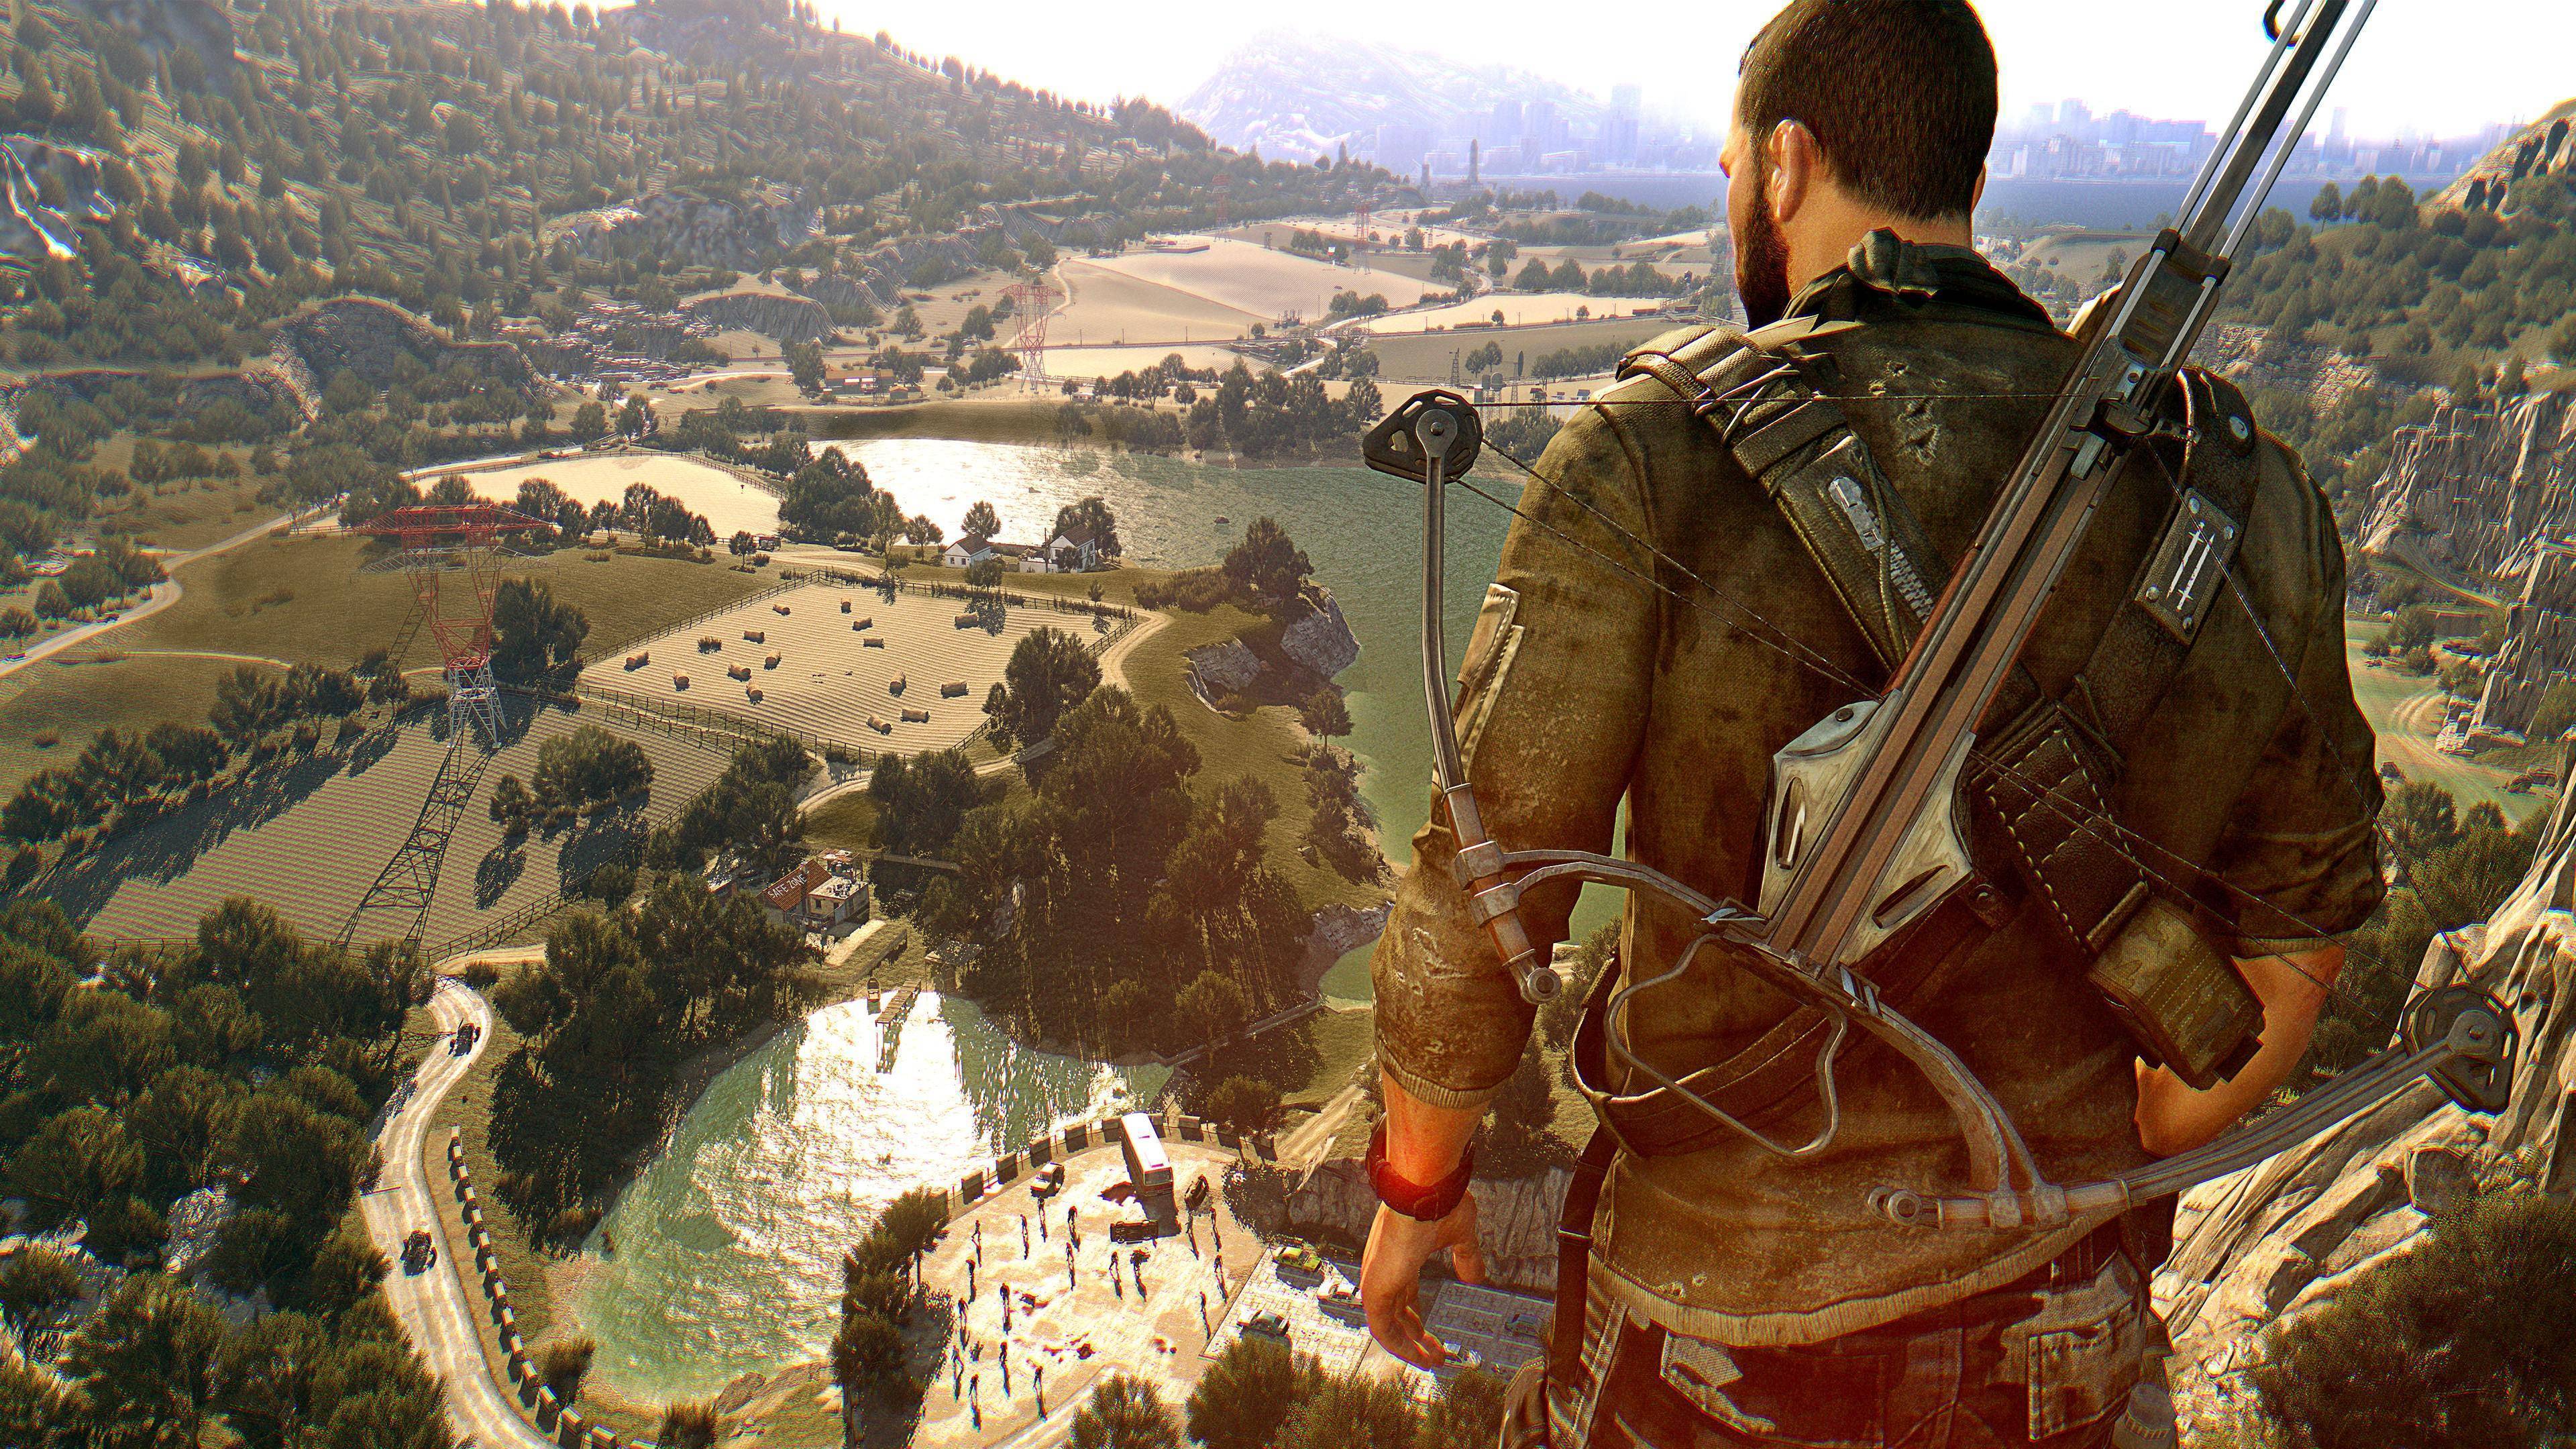 pc games like dying light